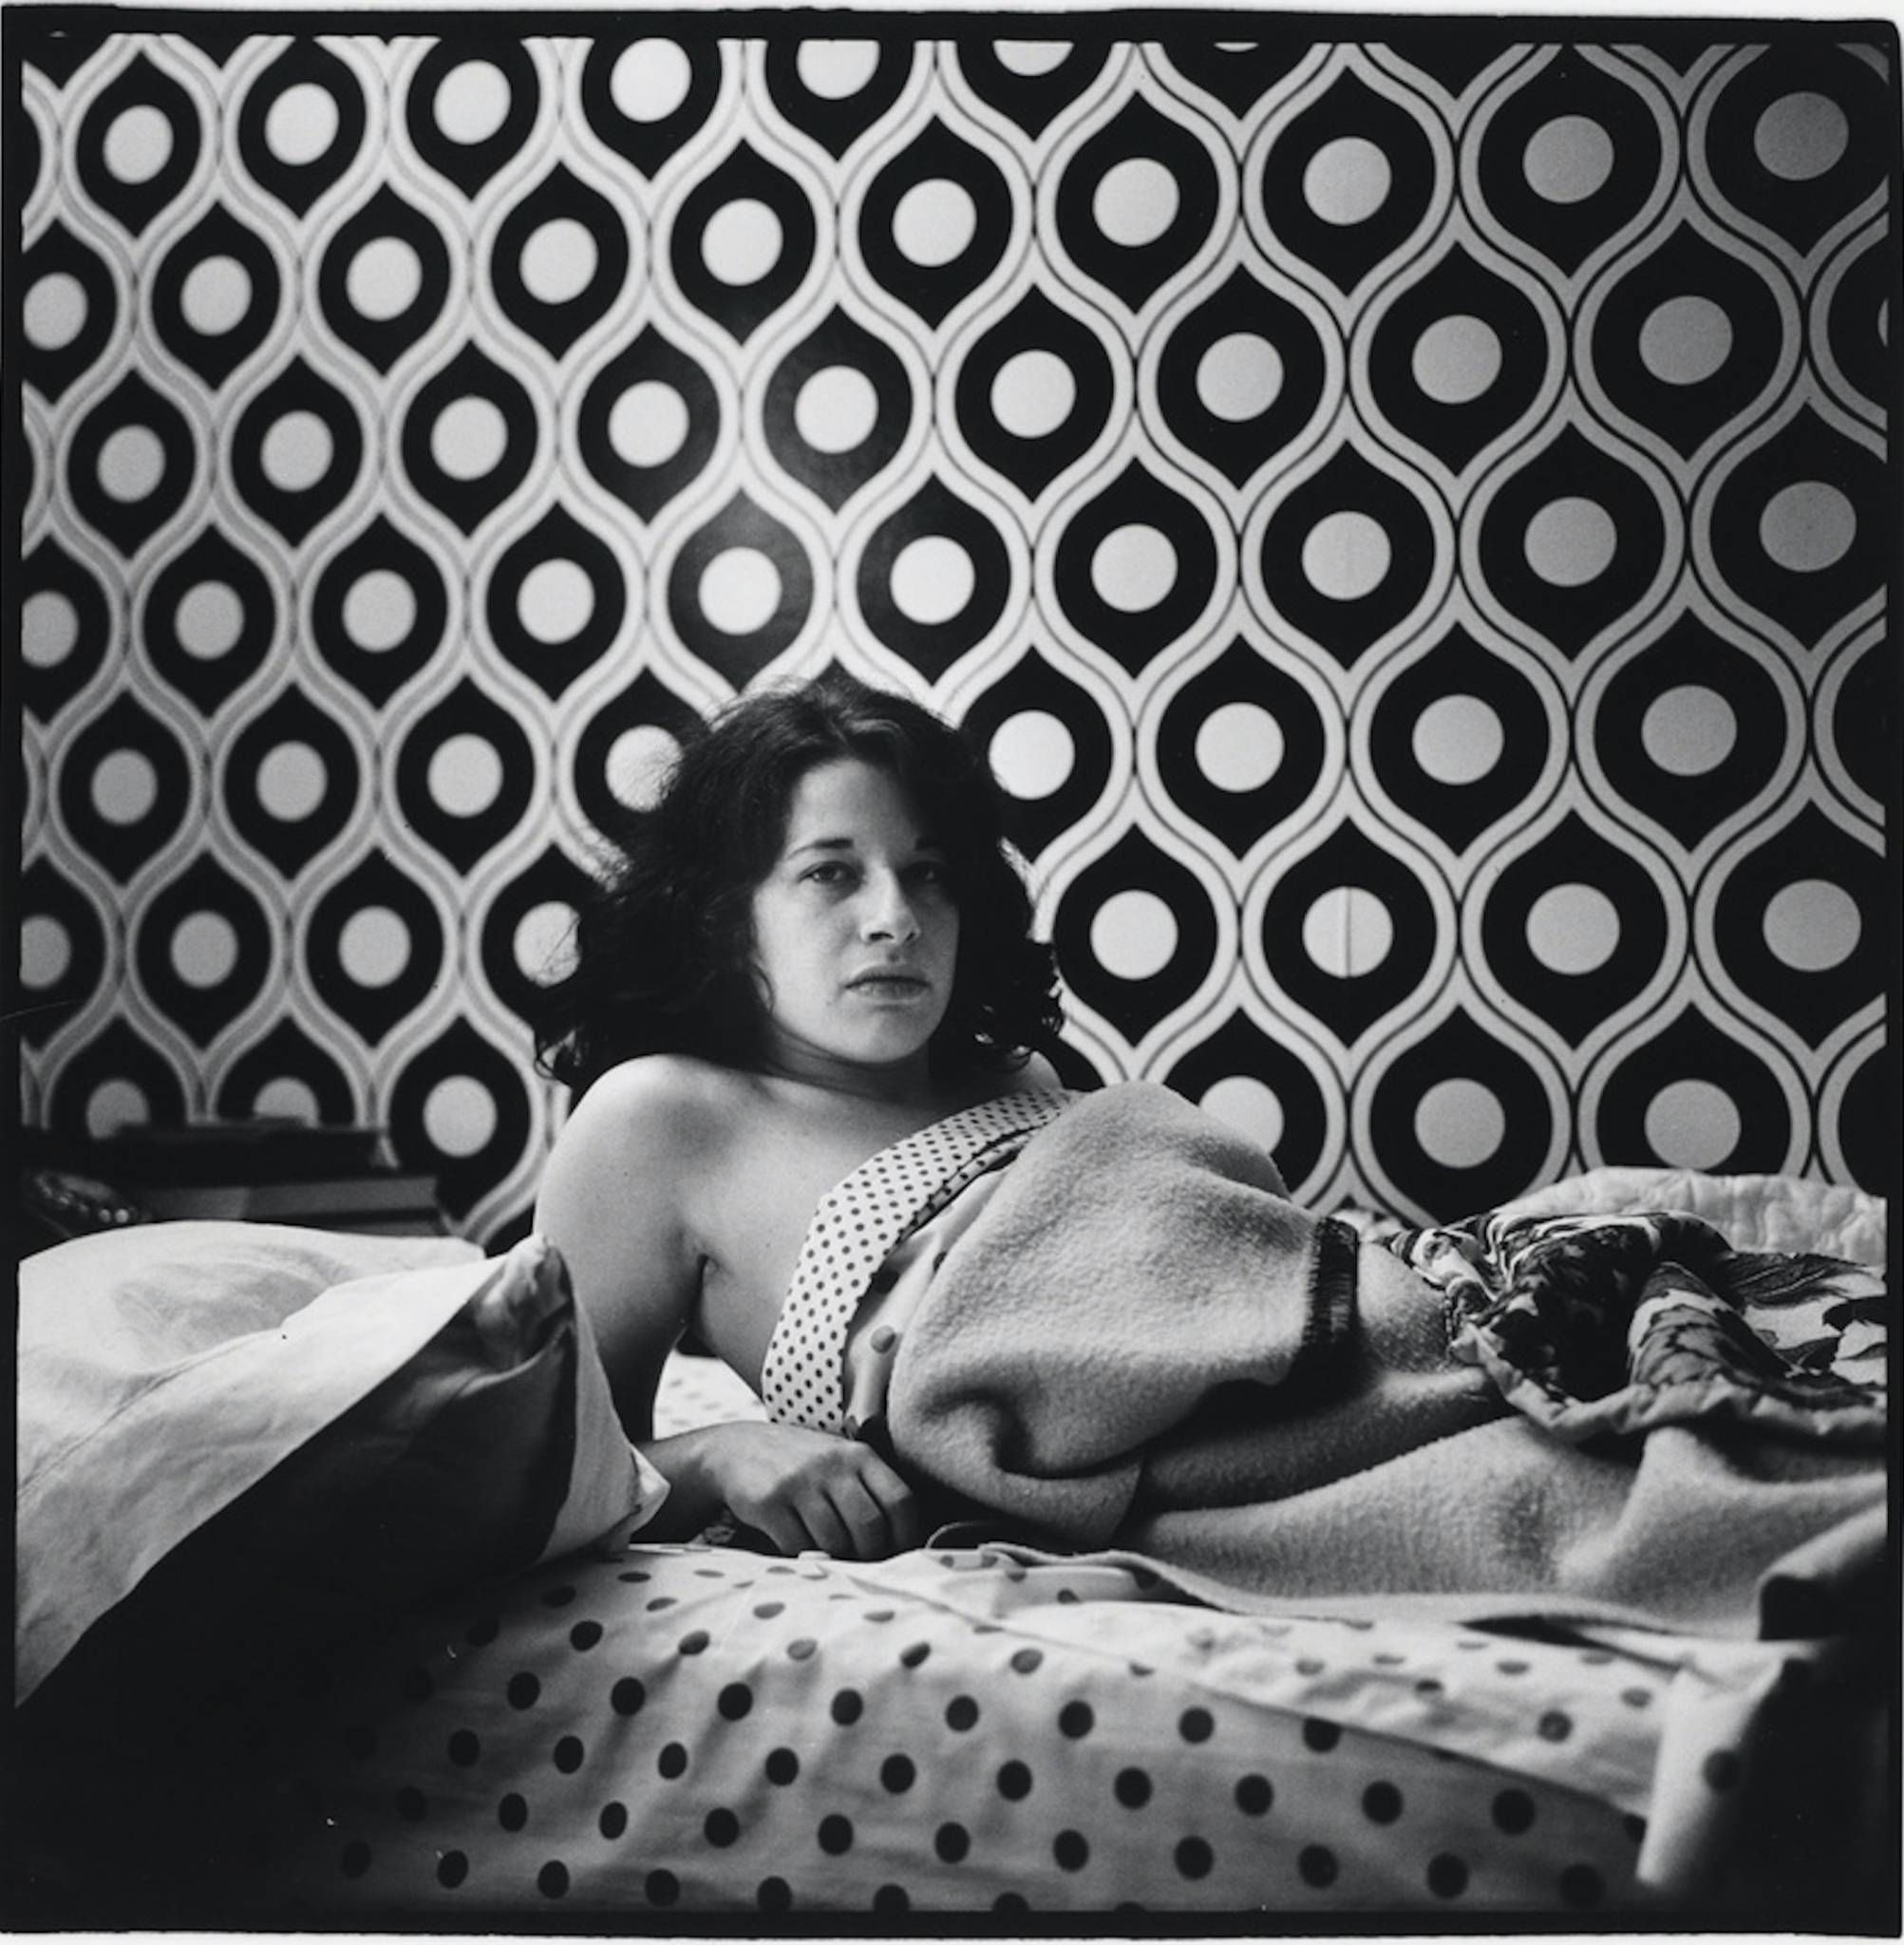 Peter Hujar, 'Fran Lebowitz at Home in Morristown, New Jersey,' 1974.